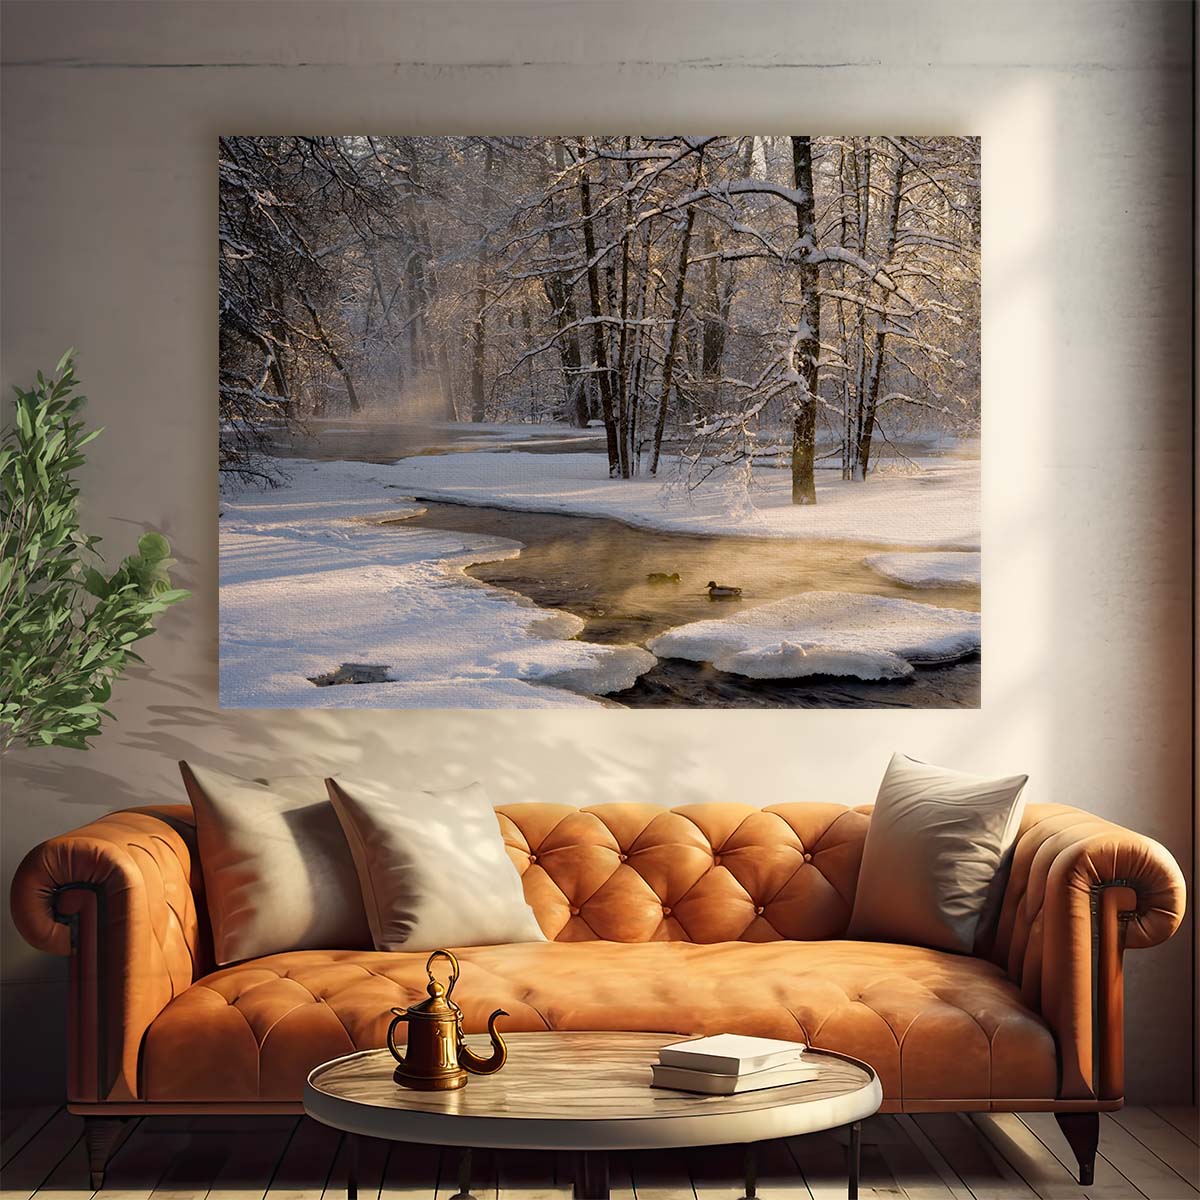 Sunrise Over Snowy Swedish Forest Landscape Wall Art by Luxuriance Designs. Made in USA.